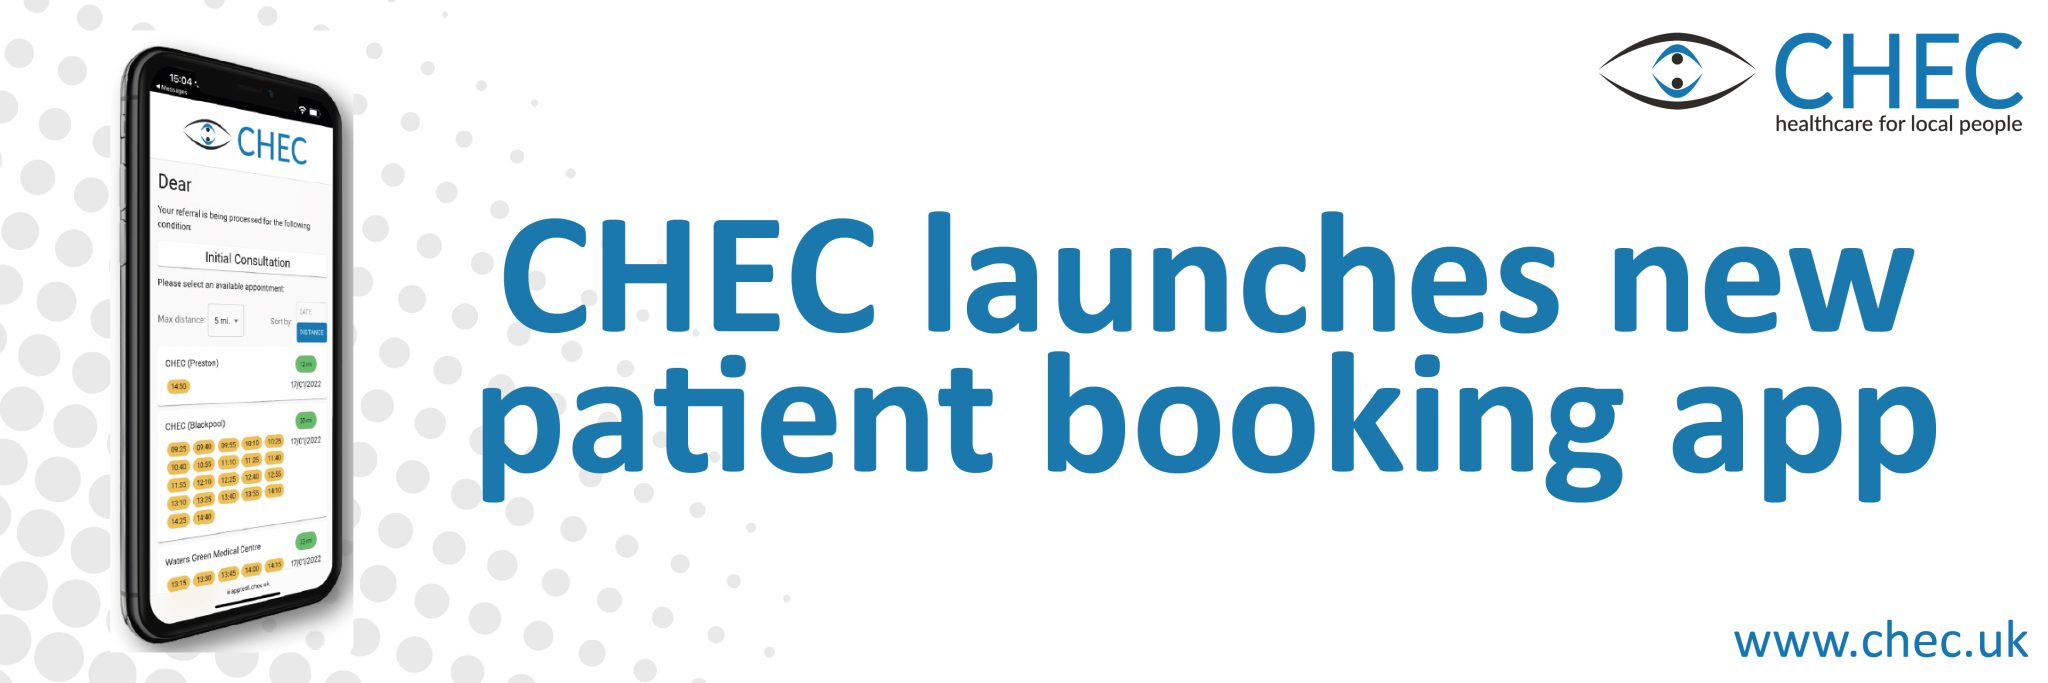 chec launches new patient booking app